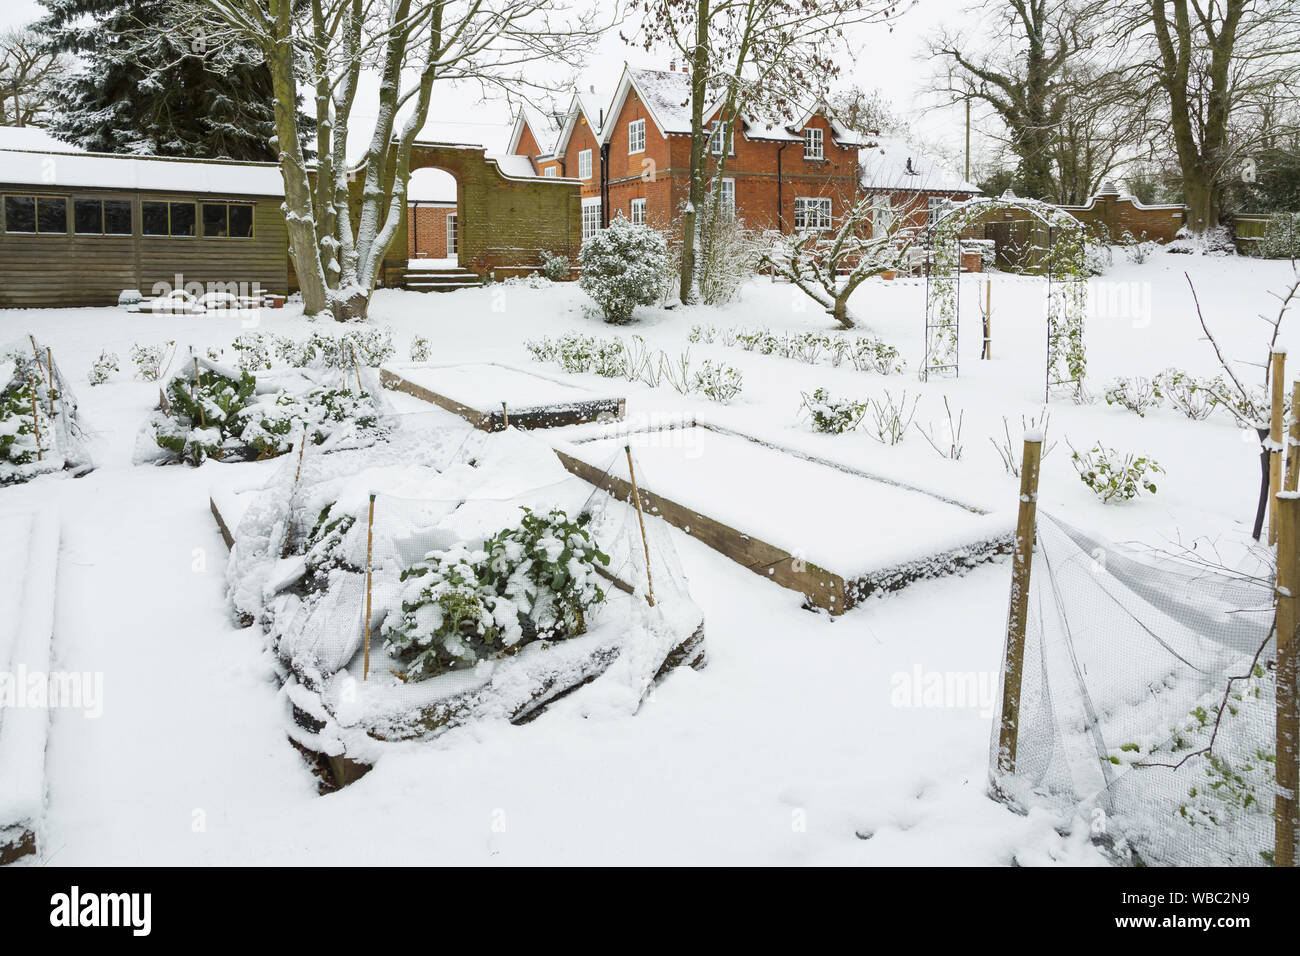 Large vegetable garden covered in snow in winter, England UK Stock Photo